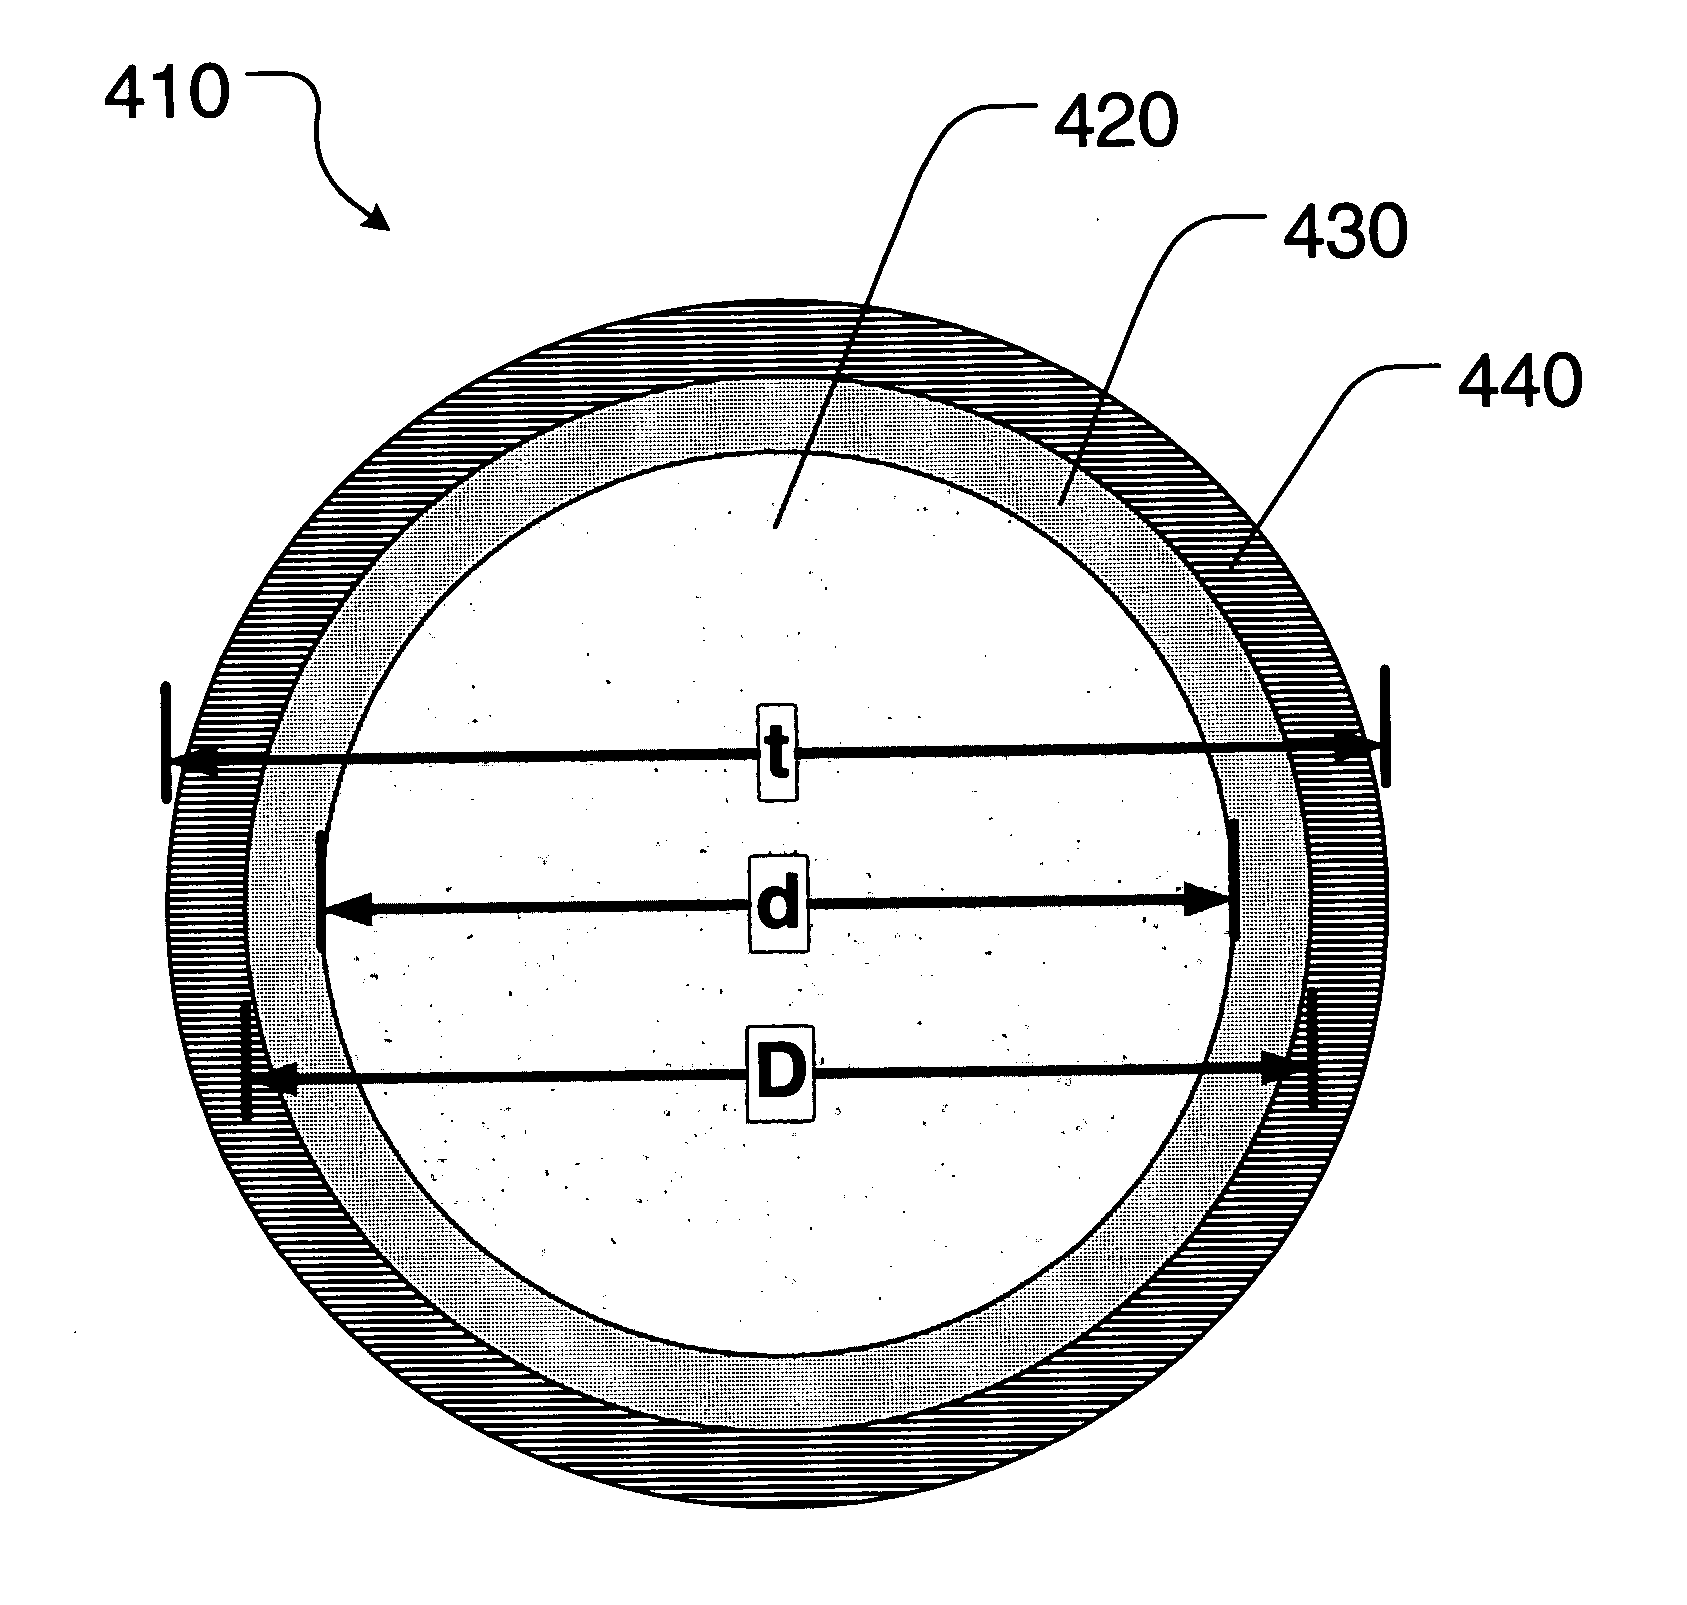 Method for construction of low thermal expansion and low resistance wire for logging applications